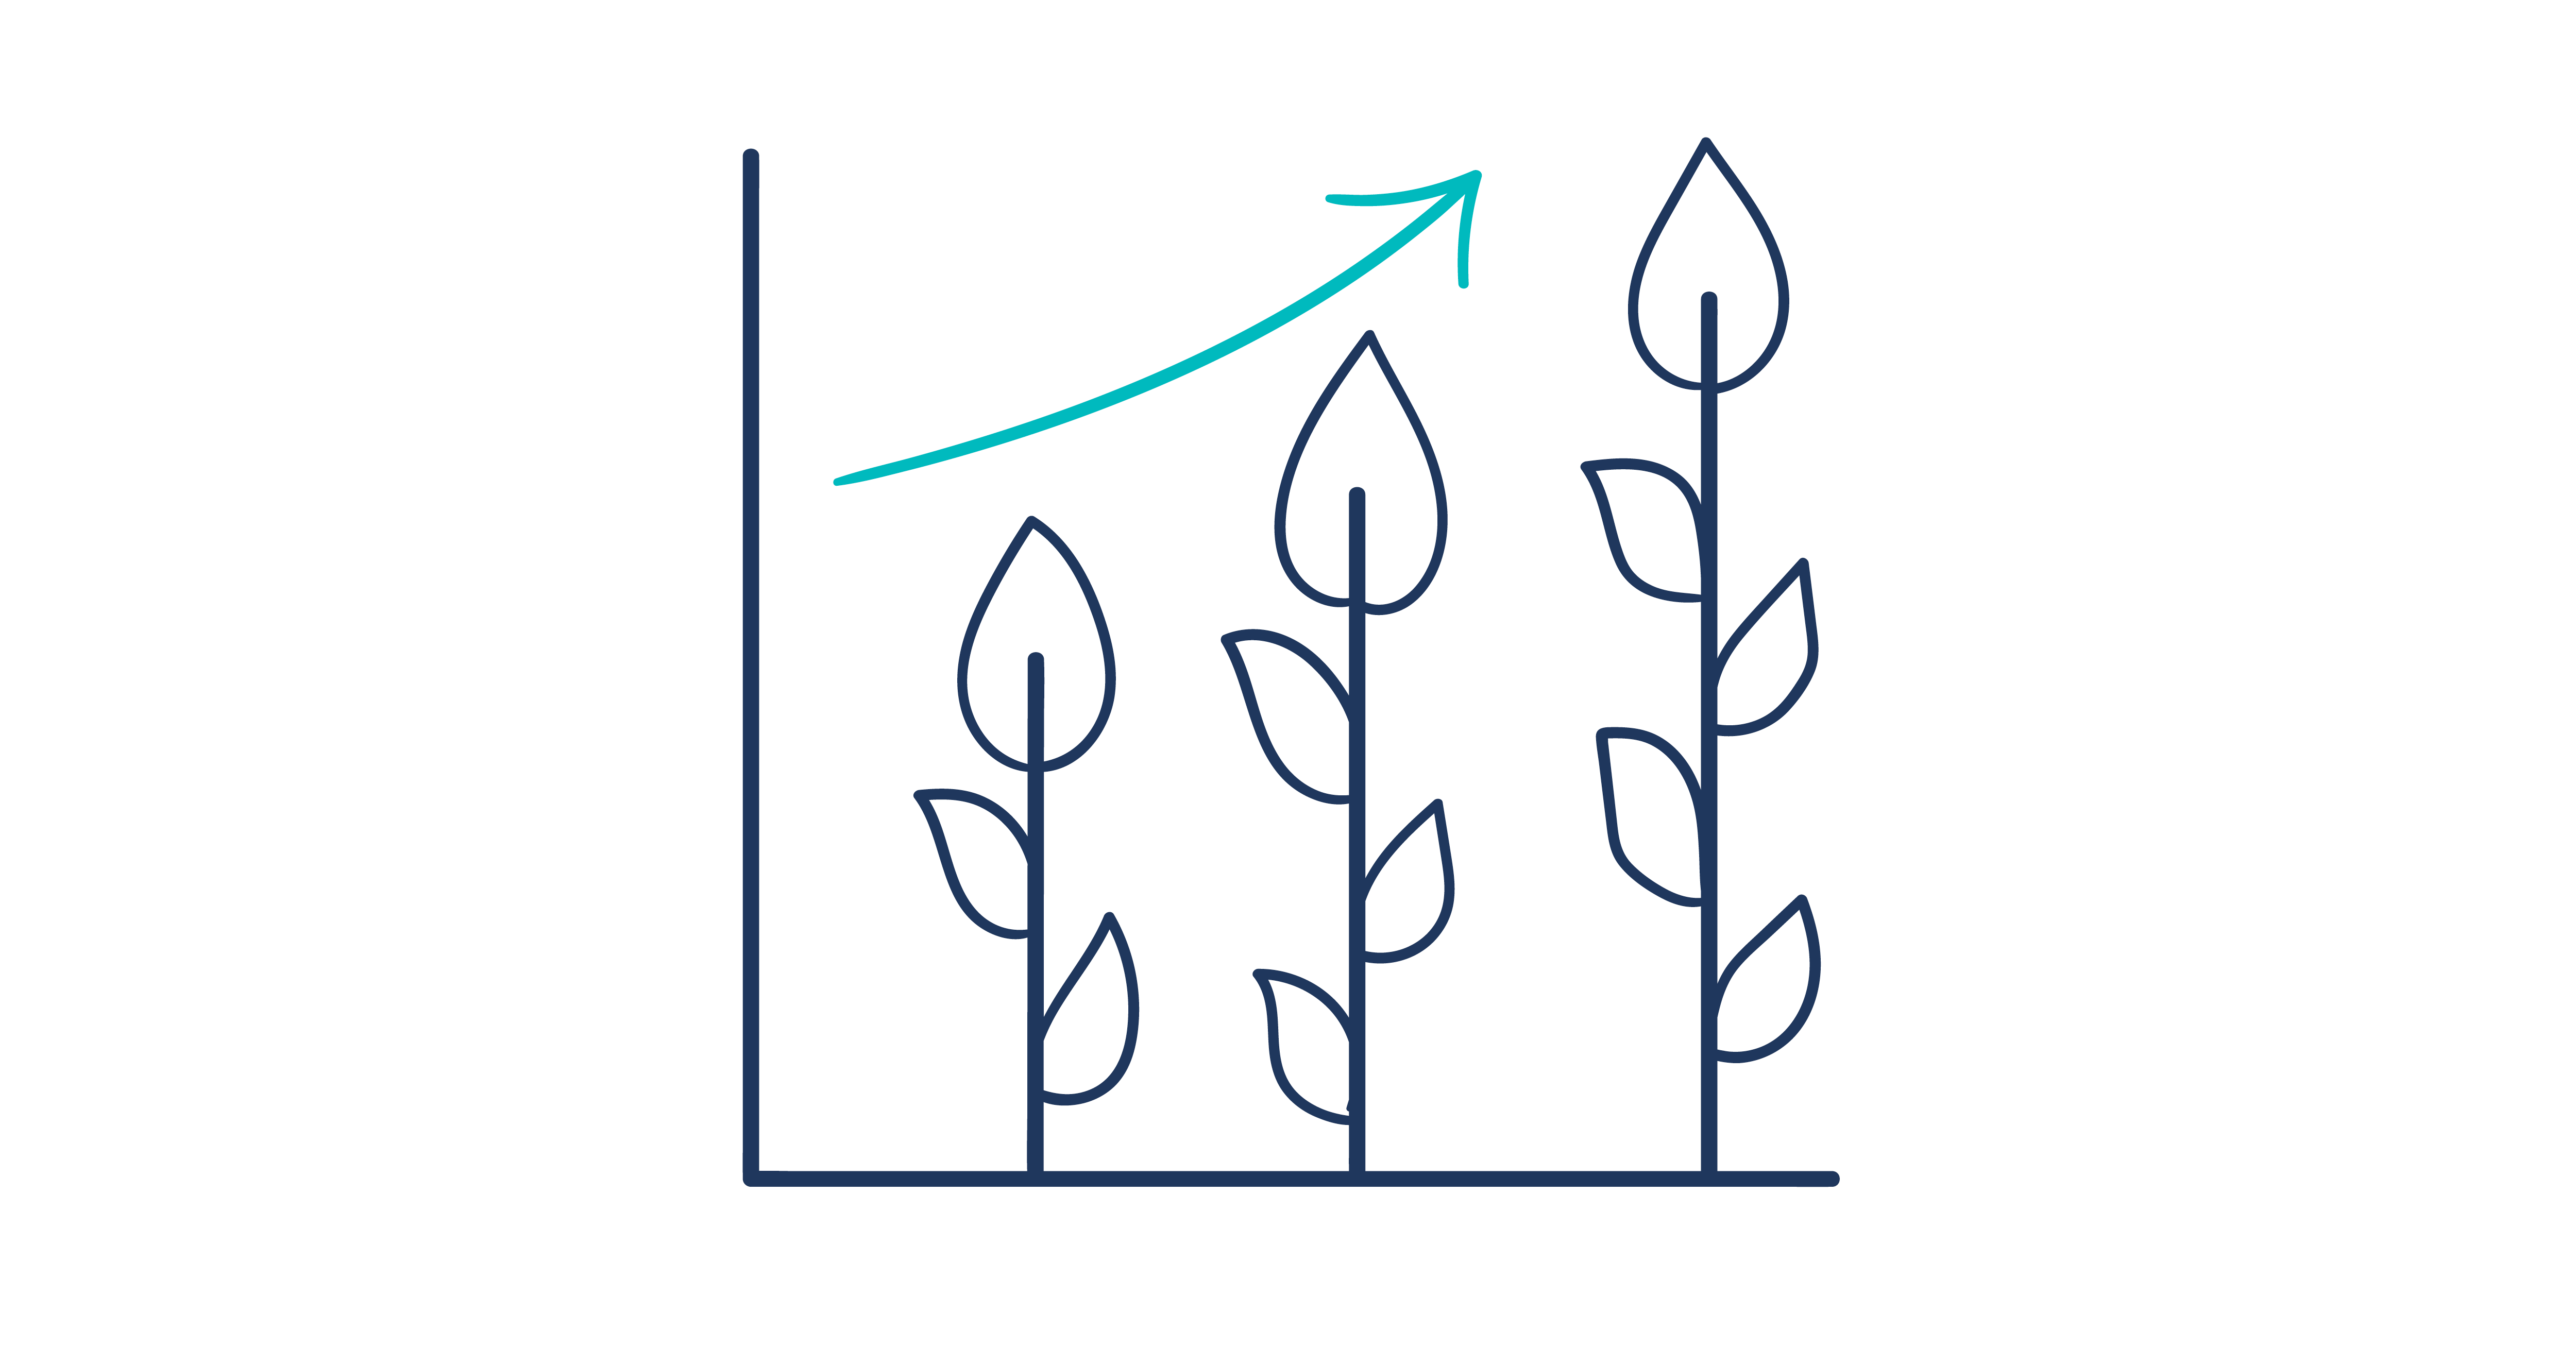 Illustration of a diagram showing growth where bars look like plants